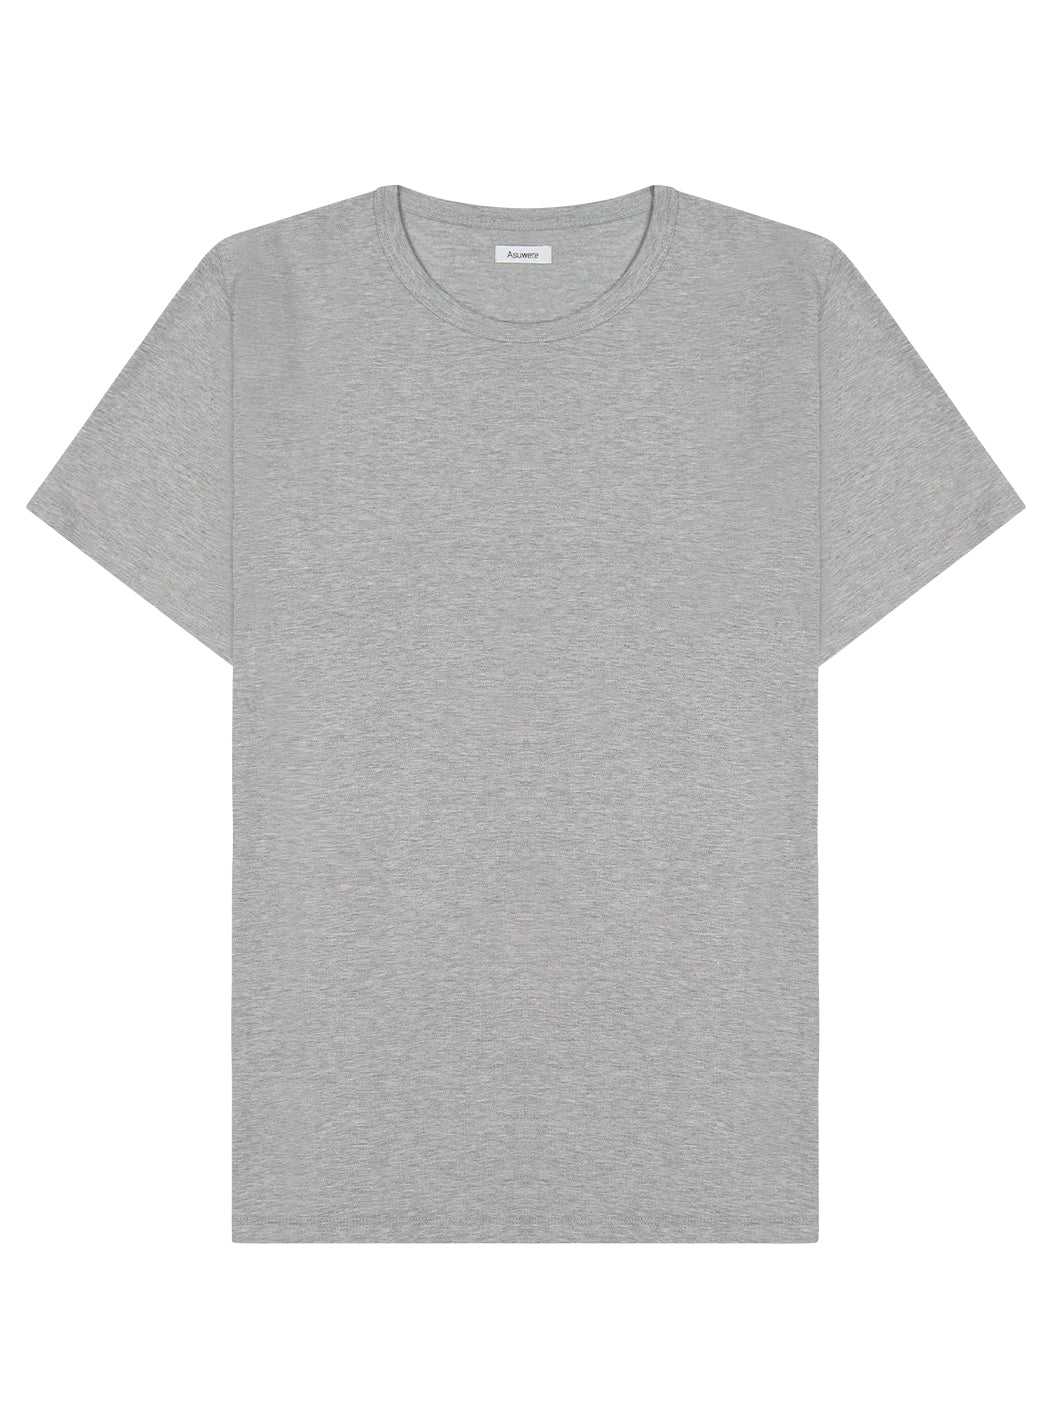 Front of Bound Pima Tee in Grey Marle